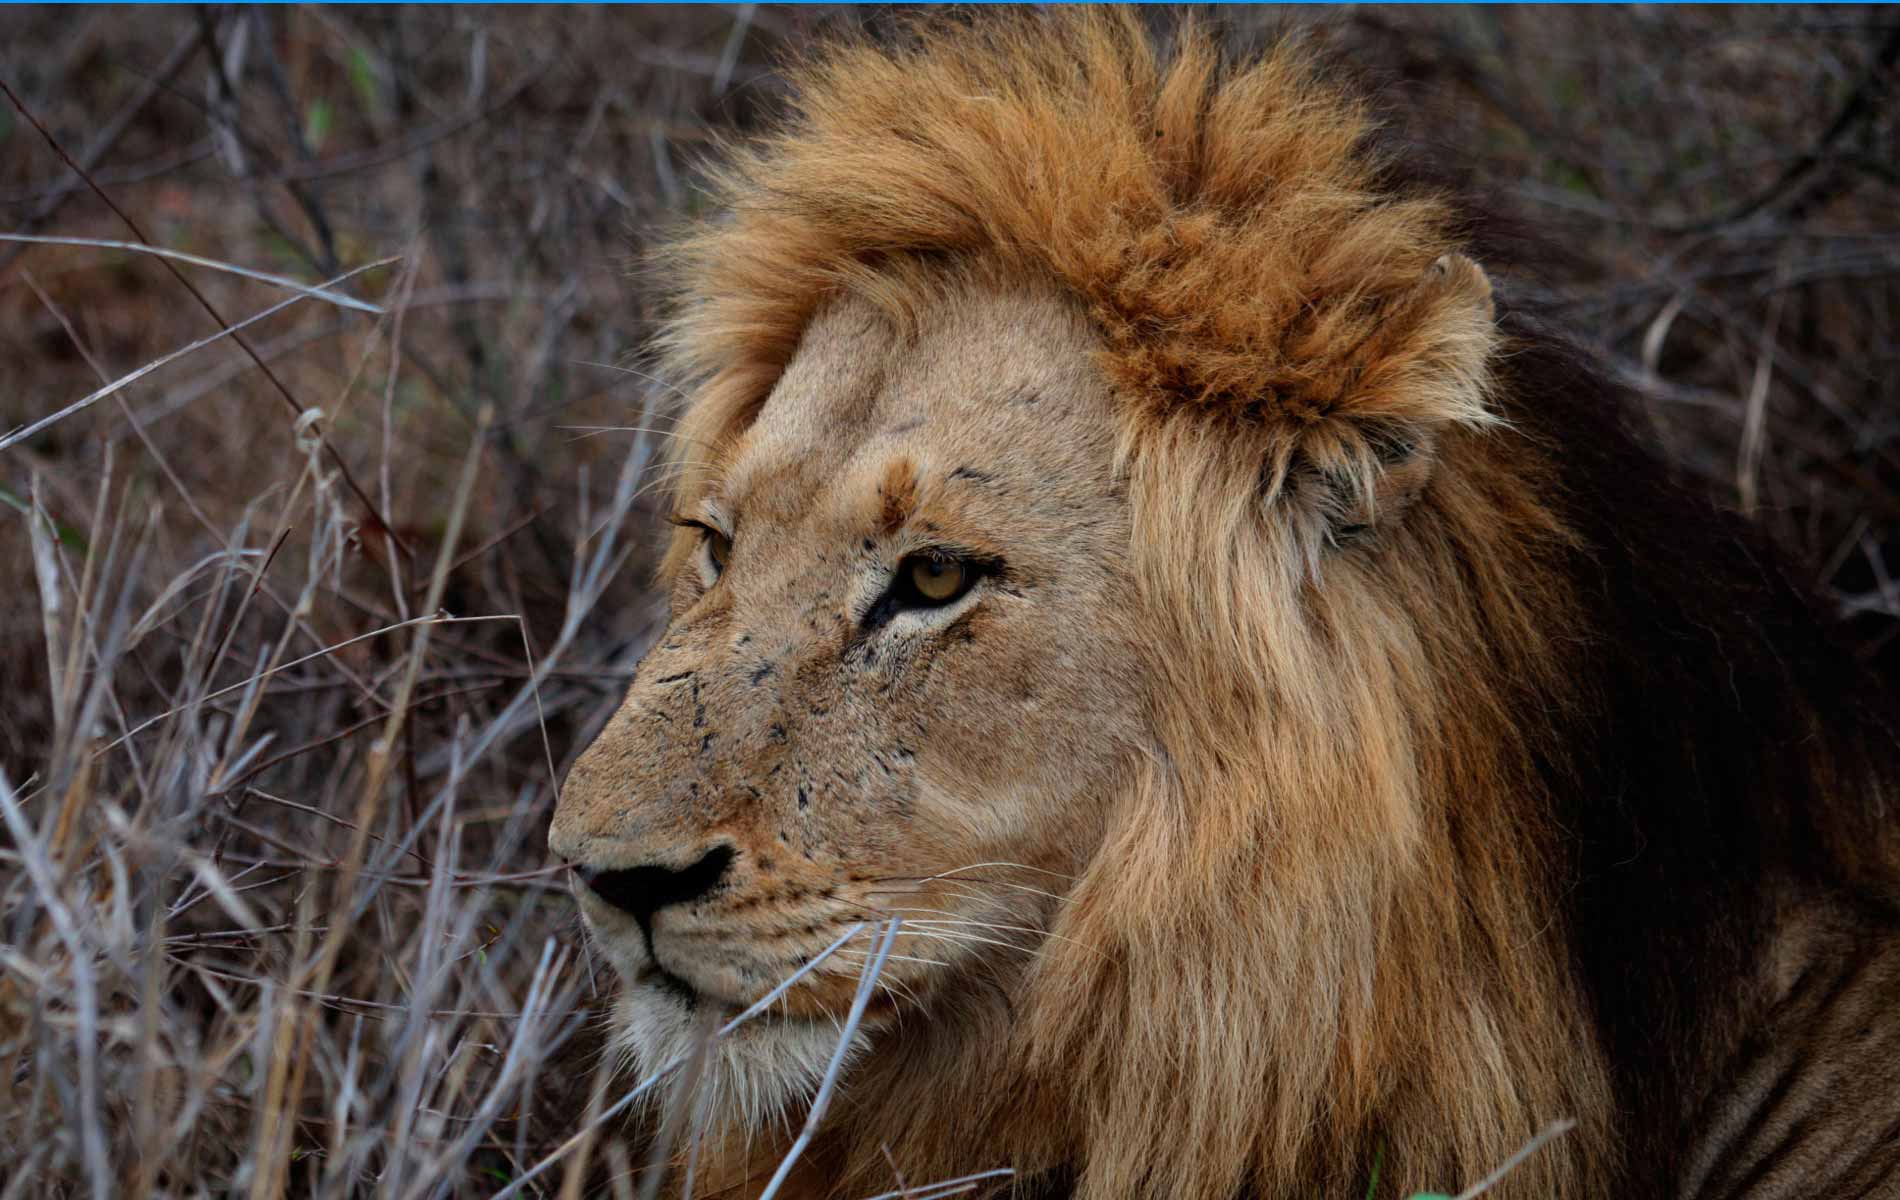 The King Lion - One of "The Big Five Game" - © Graziano Villa